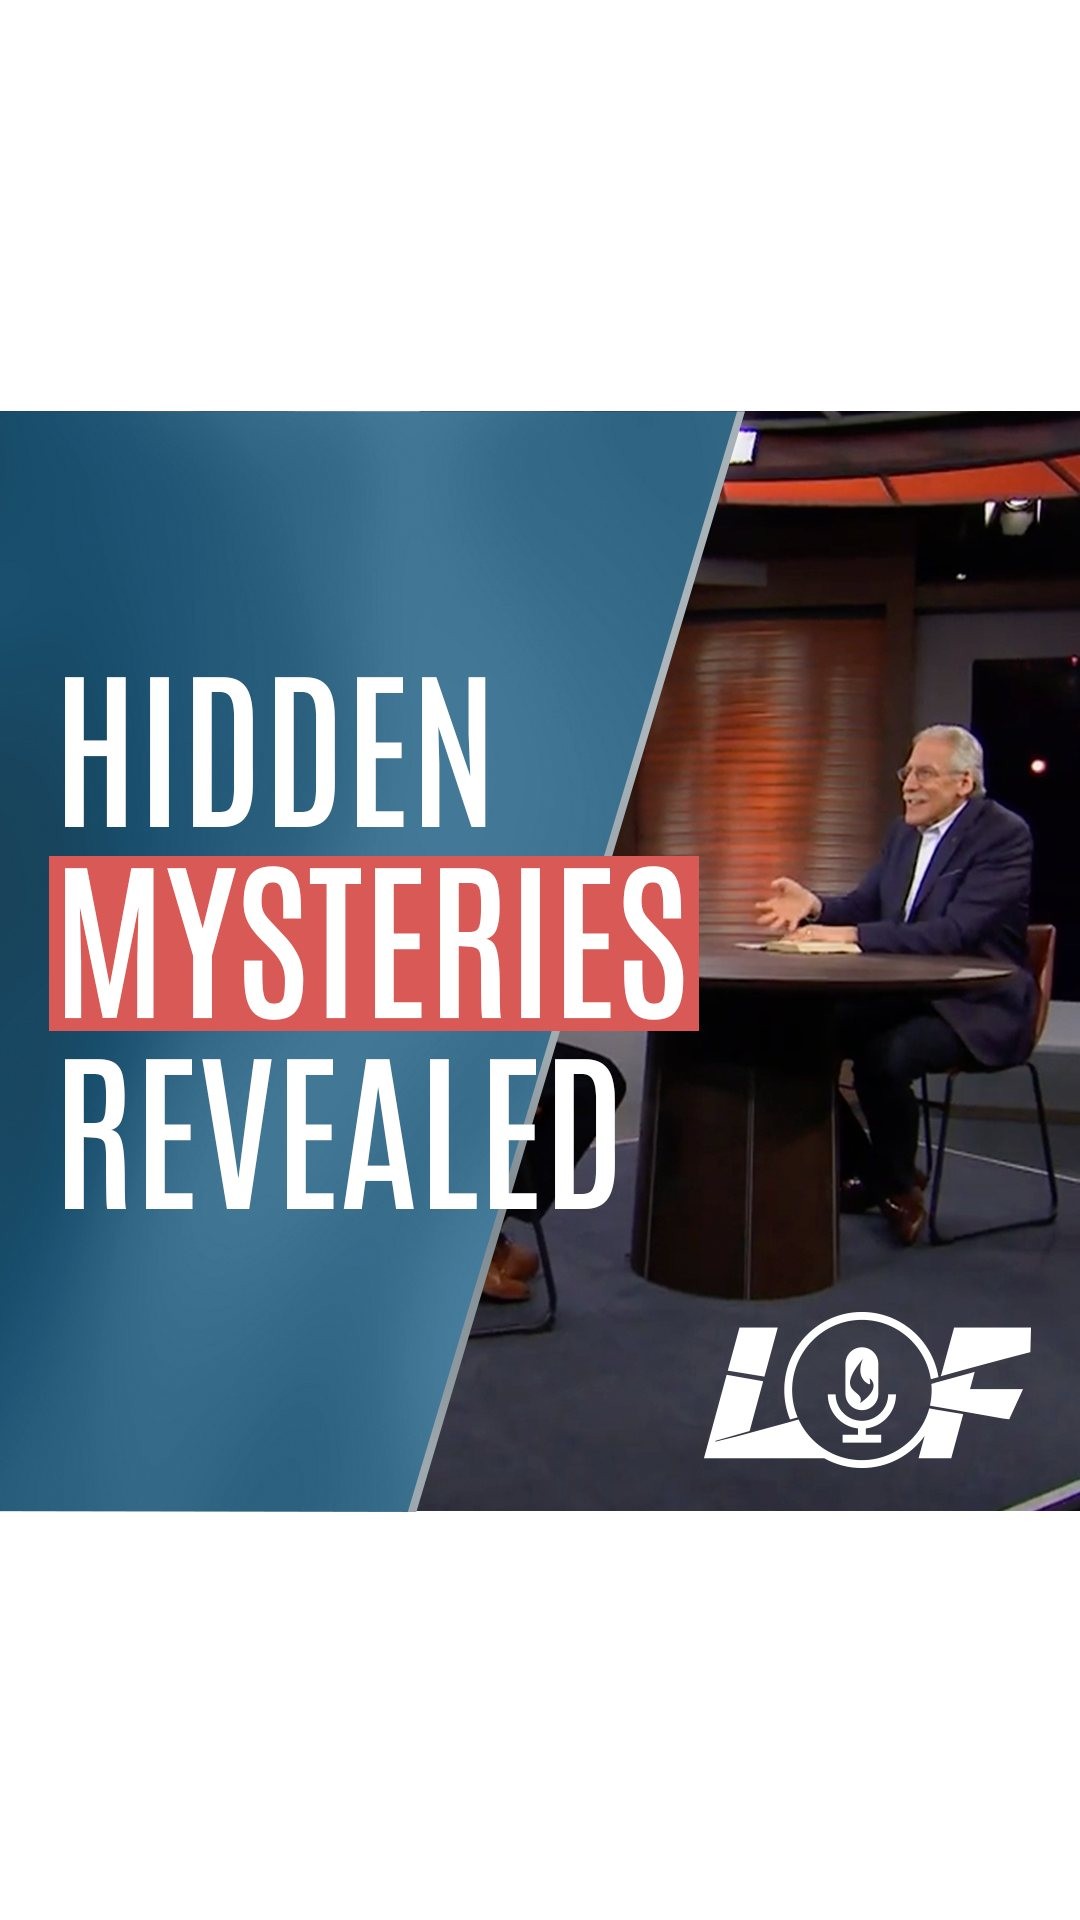 Hidden Mysteries Revealed“The devil hides his mysteries in the darkness; God hides His mysteries in the light.” So argues Dr. Bob Gladstone in the final episode of the Ways of the Kingdom series, where he and Dr. Brown discuss the “Mysteries” in Paul’s writings. LINK TO FULL VIDEO IN BIO